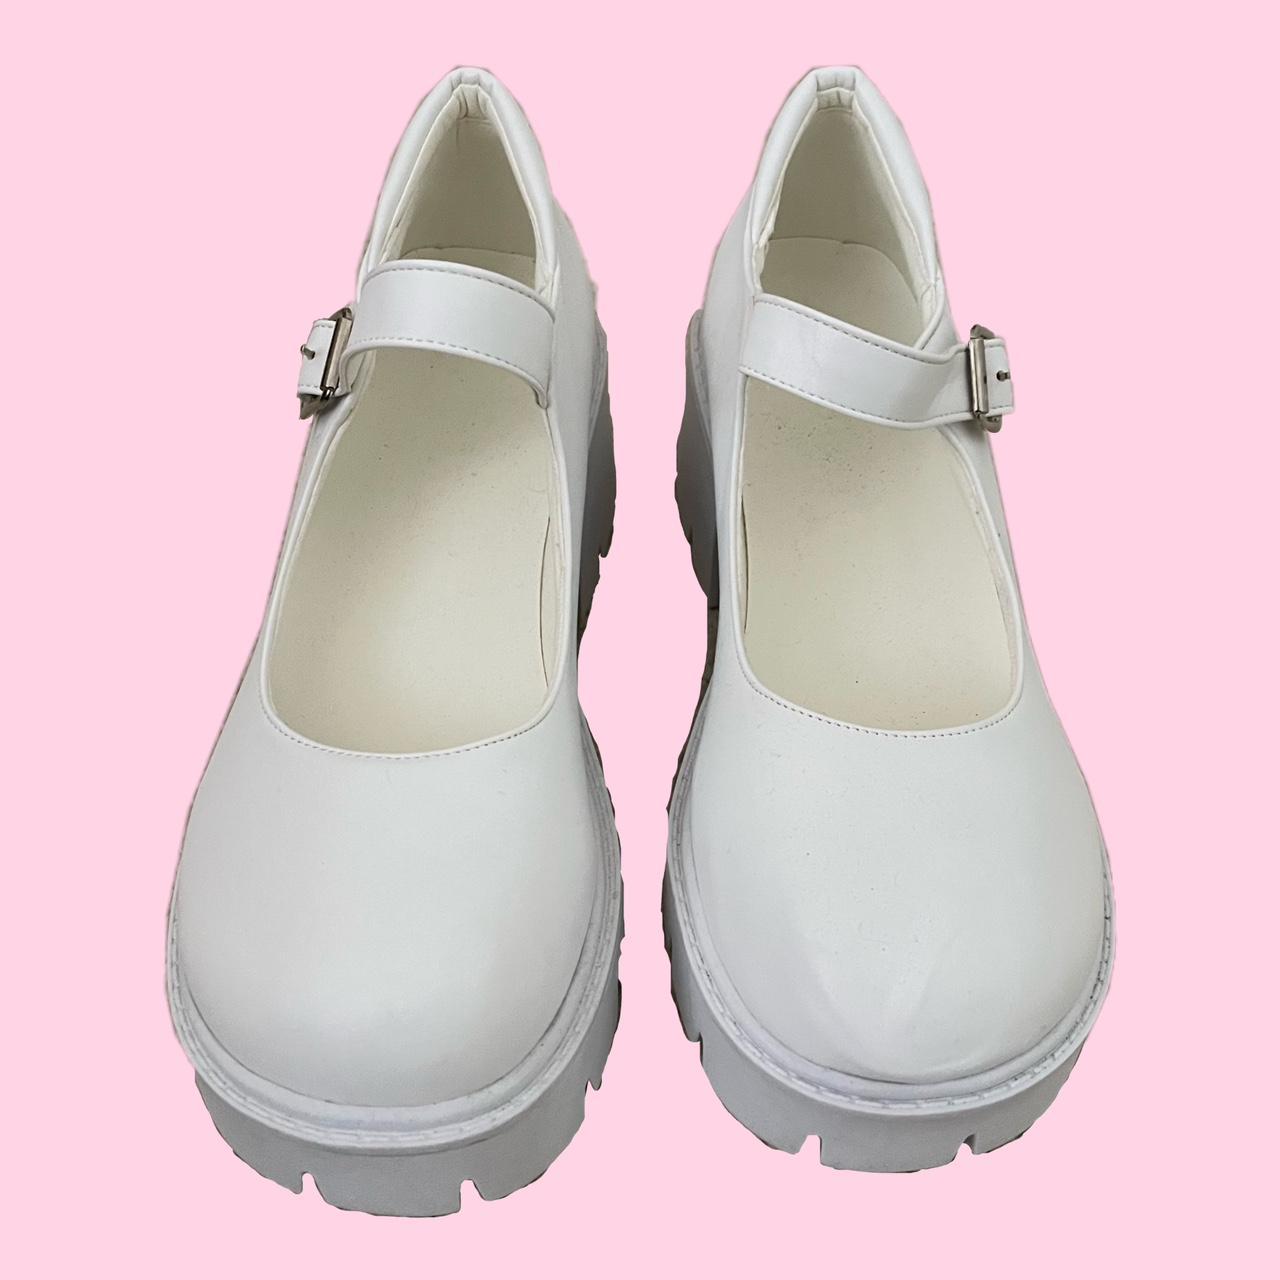 Women's White Loafers (4)